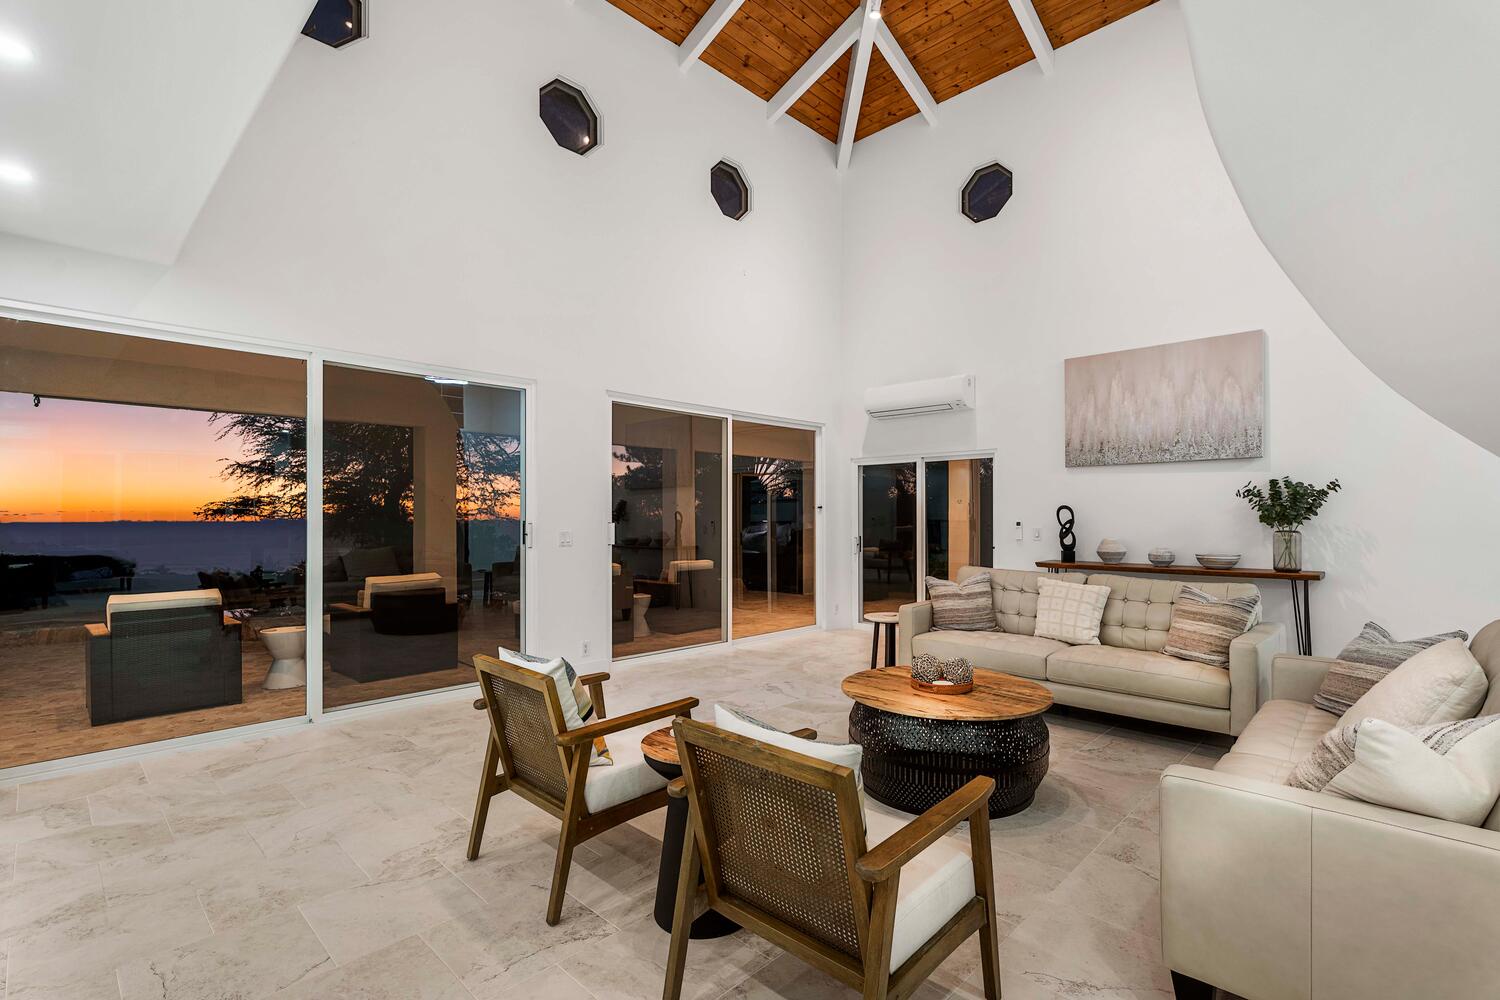 Kailua Kona Vacation Rentals, Ho'okipa Hale - Flounder in the spaciousness of the living area, highlighted by soaring vaulted ceilings and cozy sofas.